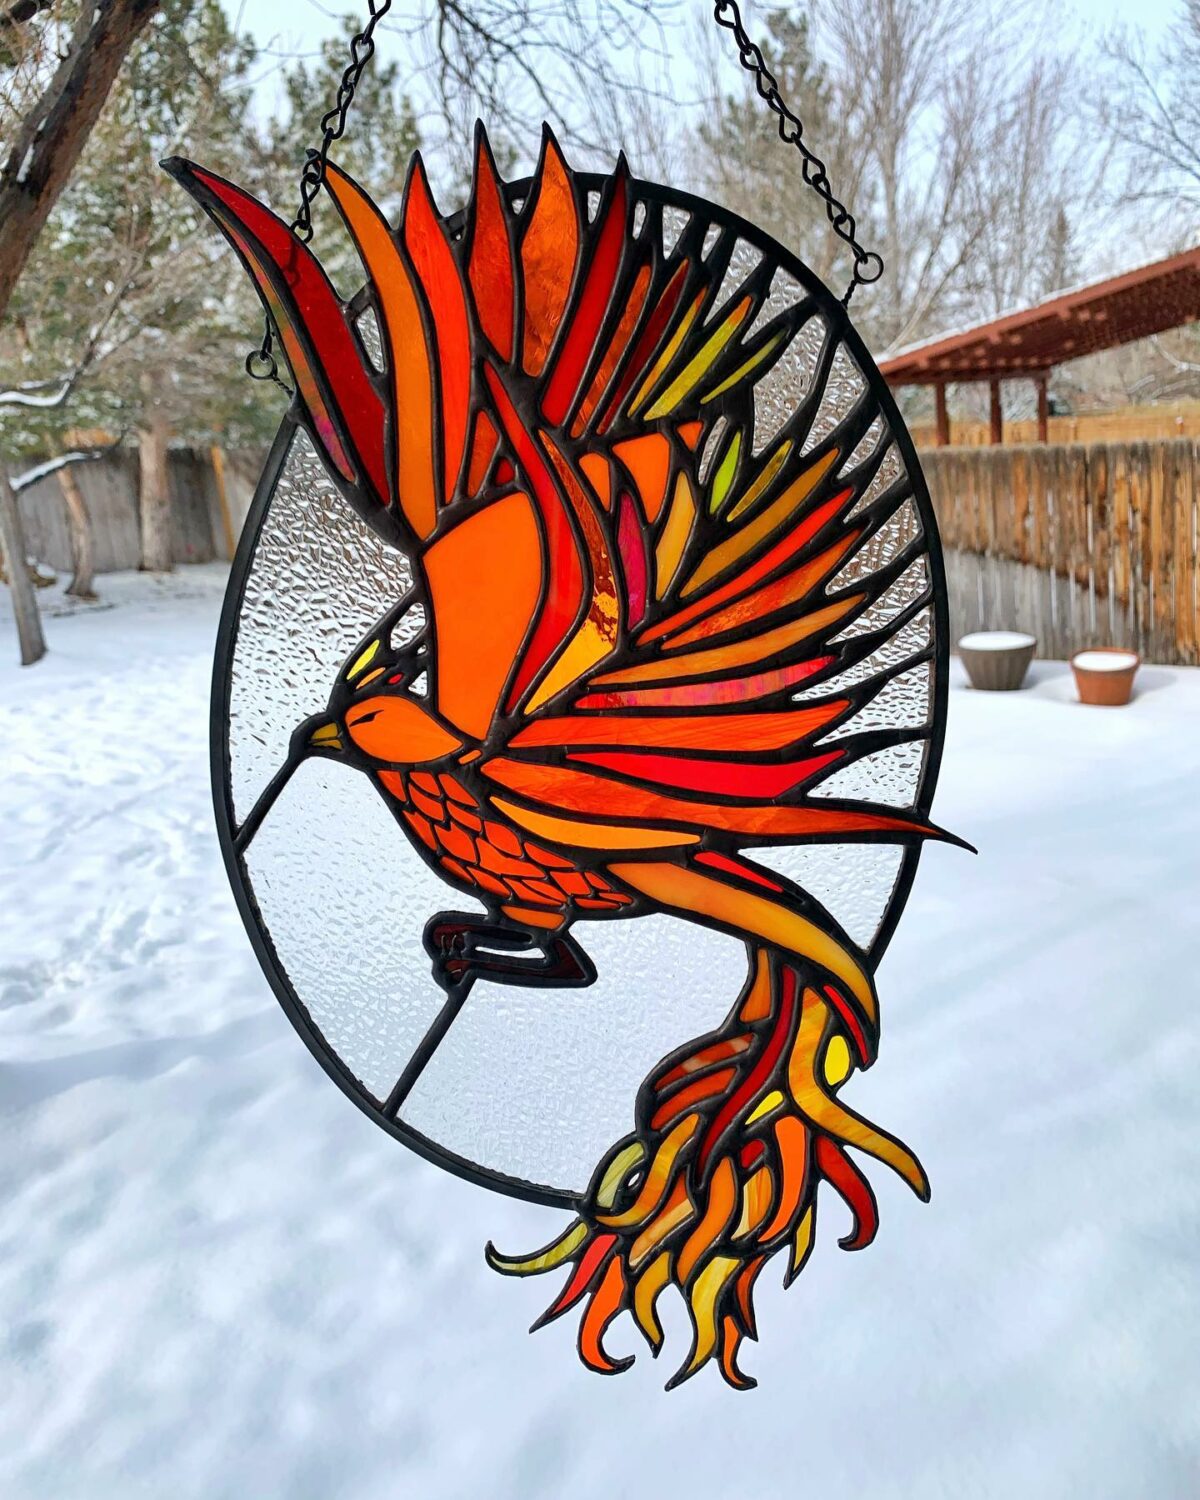 The Colorful Nature Inspired Stained Glass Art Of Meggy Wilm (15)